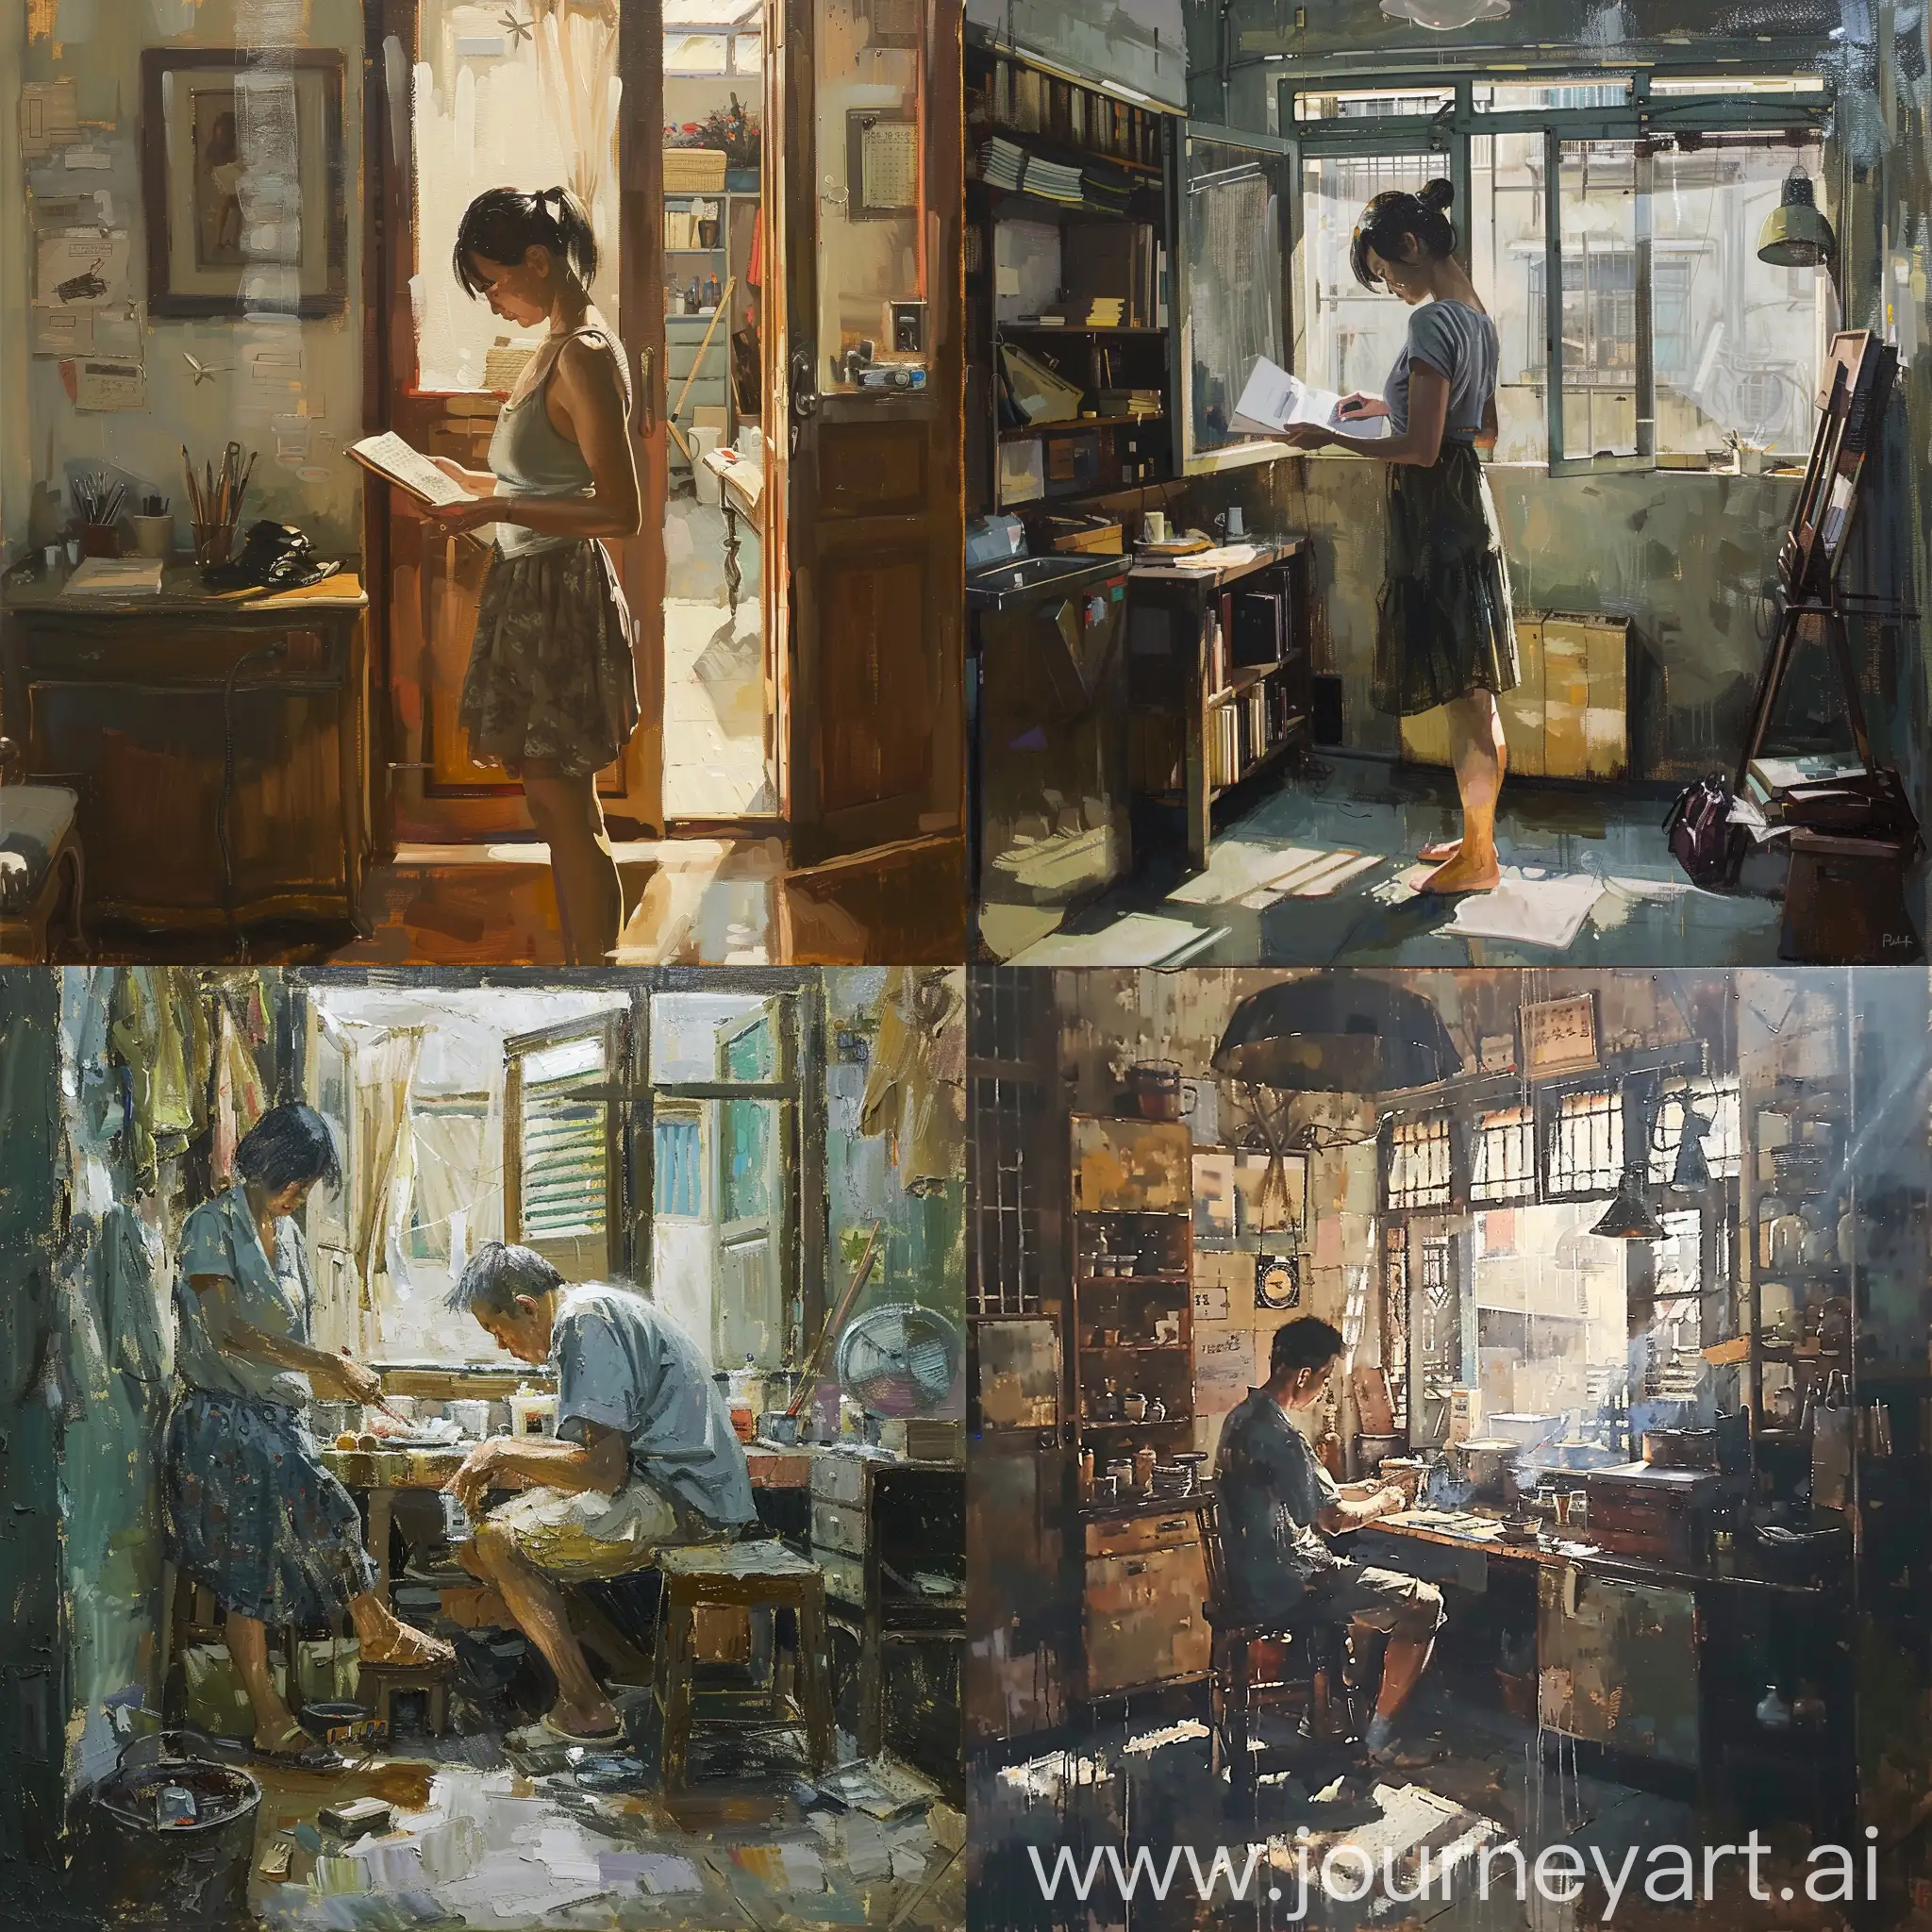 genre oil painting with a realistic style, featuring a modern interpretation of daily life. The scene should include a central figure engaged with a contemporary device or activity, set in an indoor environment with natural lighting. Emphasize the play of light and shadow, paying attention to details like clothing, furniture, and subtle textures. Use brush strokes that capture the essence of the original painting, focusing on precision and depth to bring the scene to life